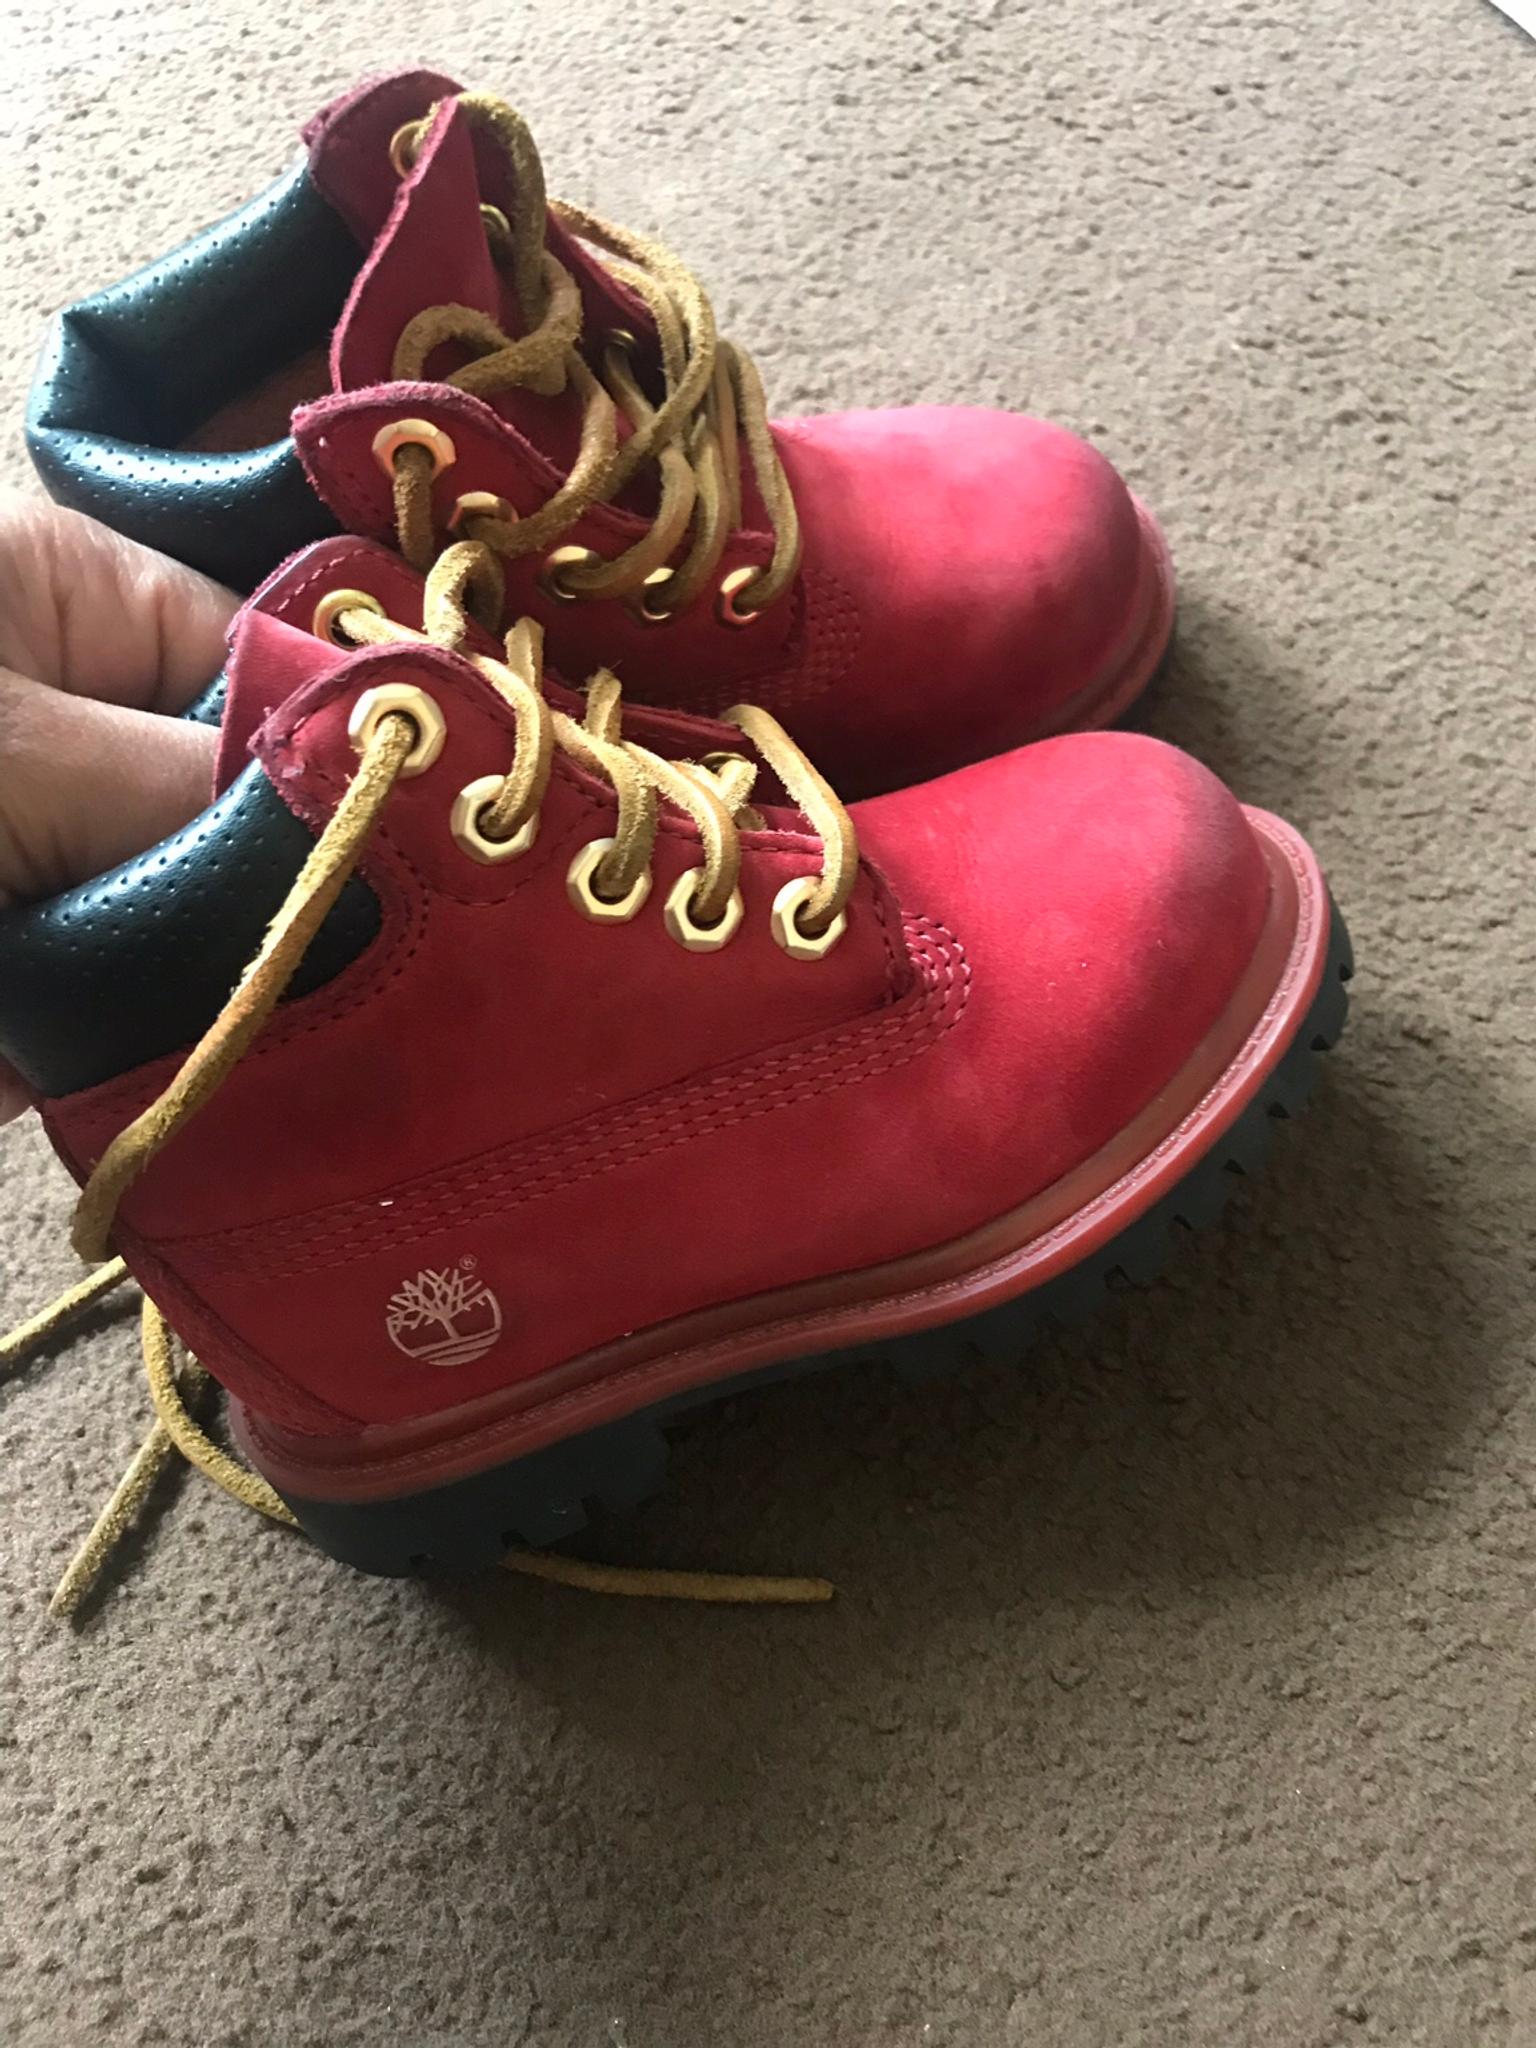 red baby timberlands